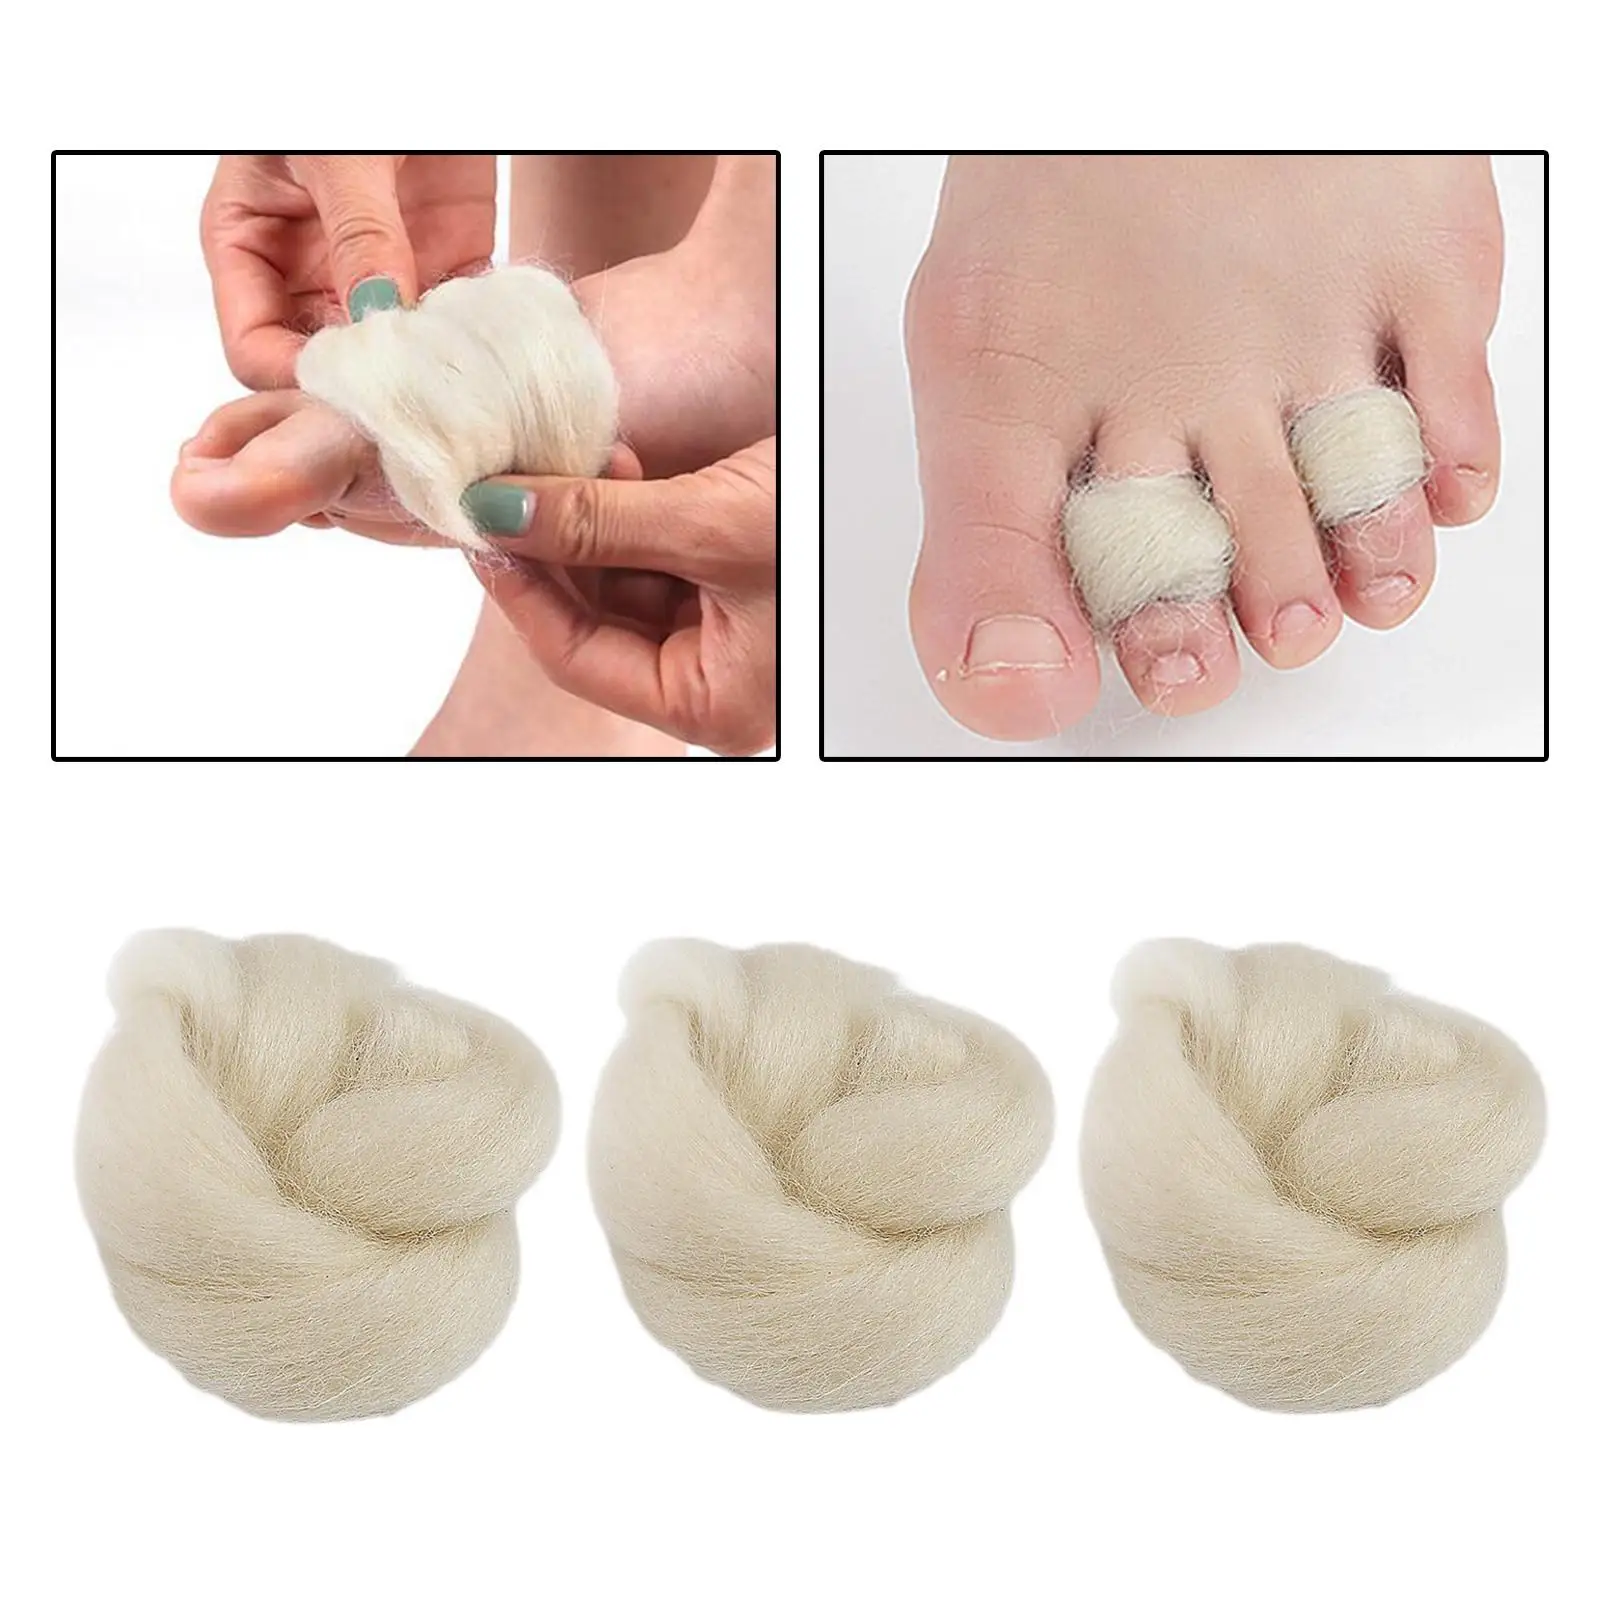 3Pcs Wool Cushioning Toe Separator Keep Your Feet Dry Accessories Reduce Blisters